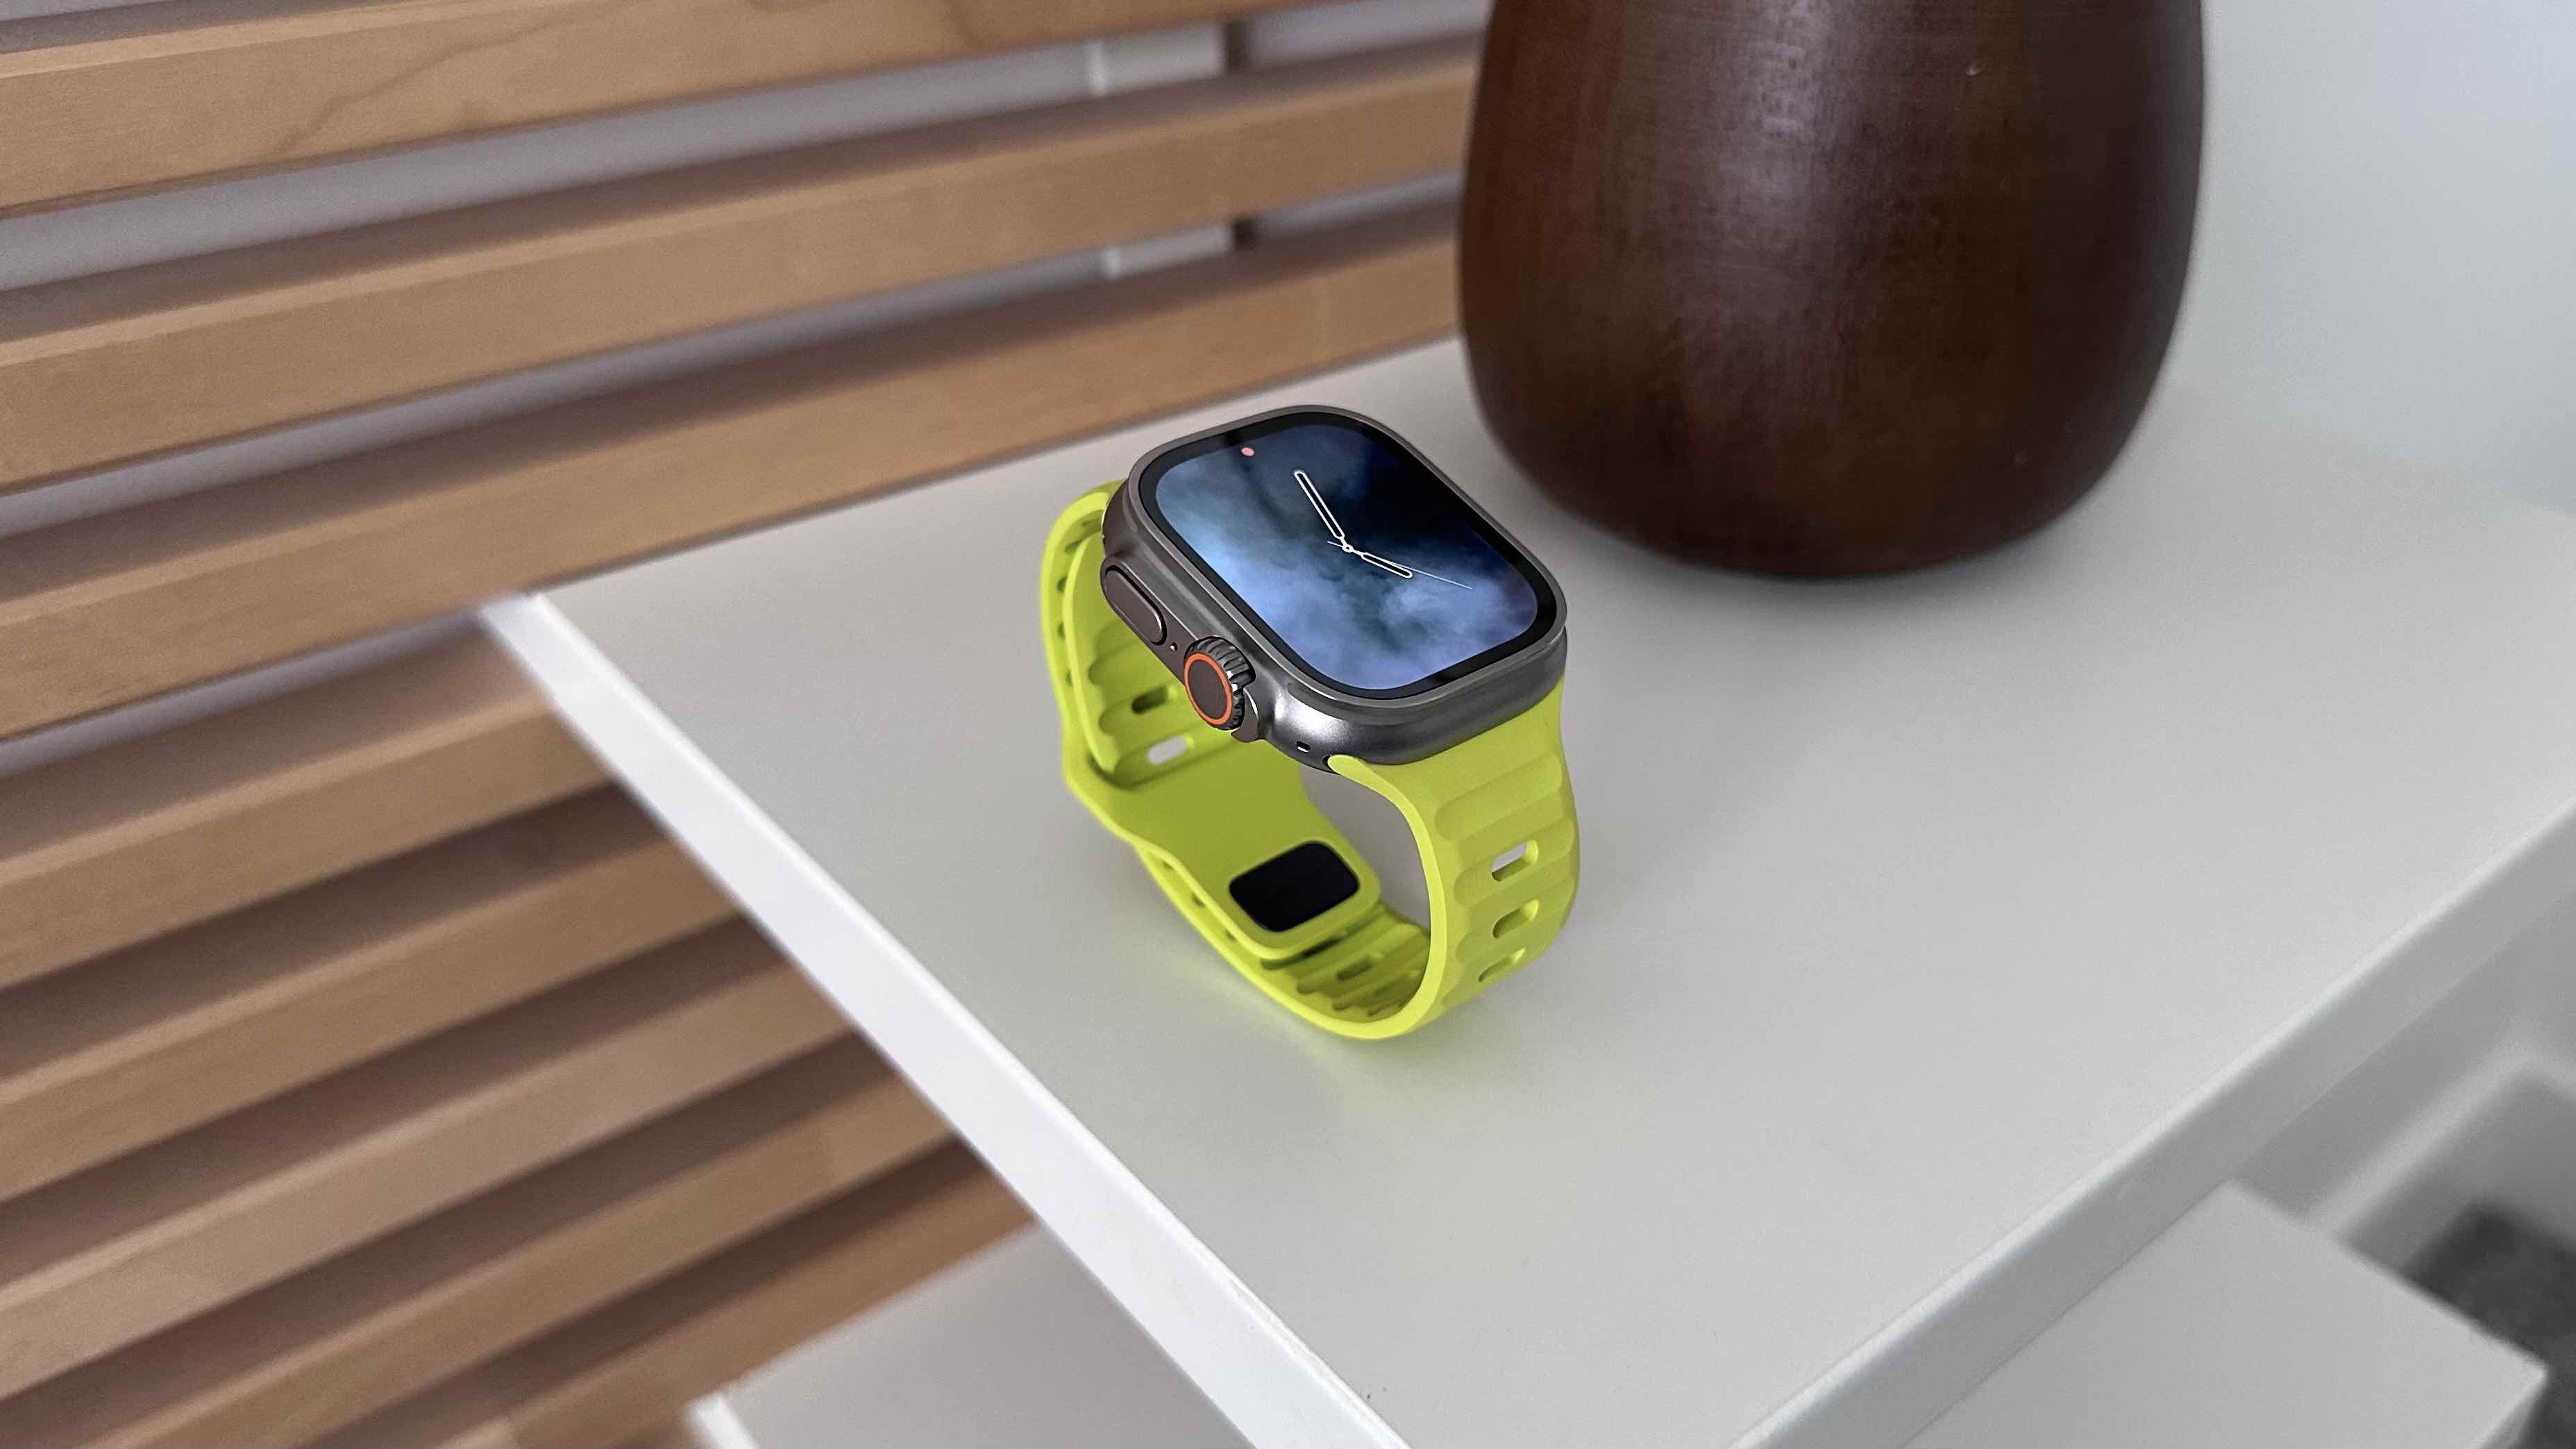 Hands-on: Nomad's 'High Volta' Sport Band gives your Apple Watch the spark  it needs - 9to5Mac